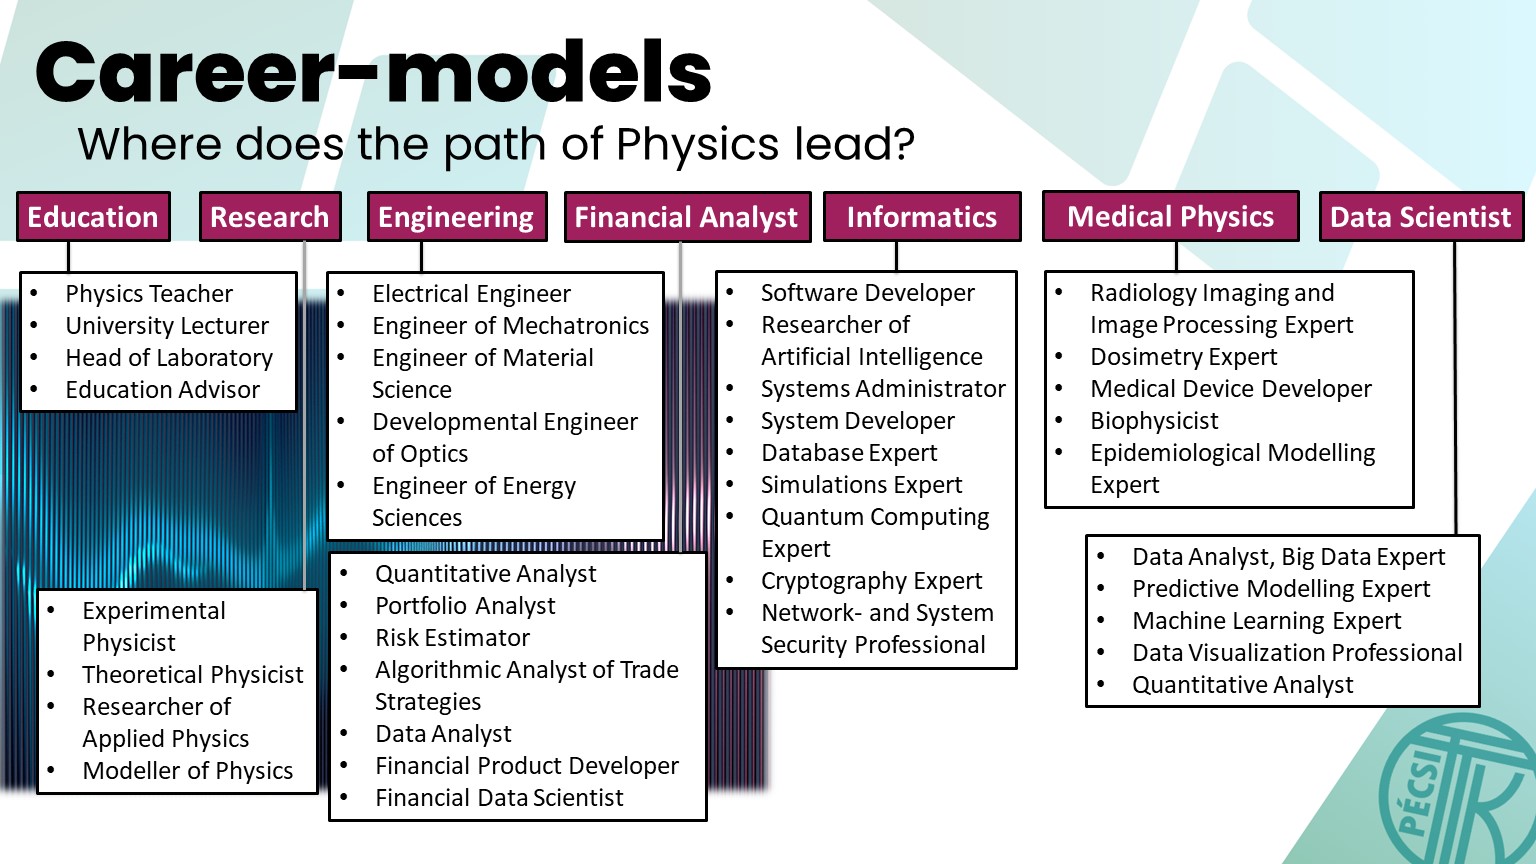 Career-models for Physics students